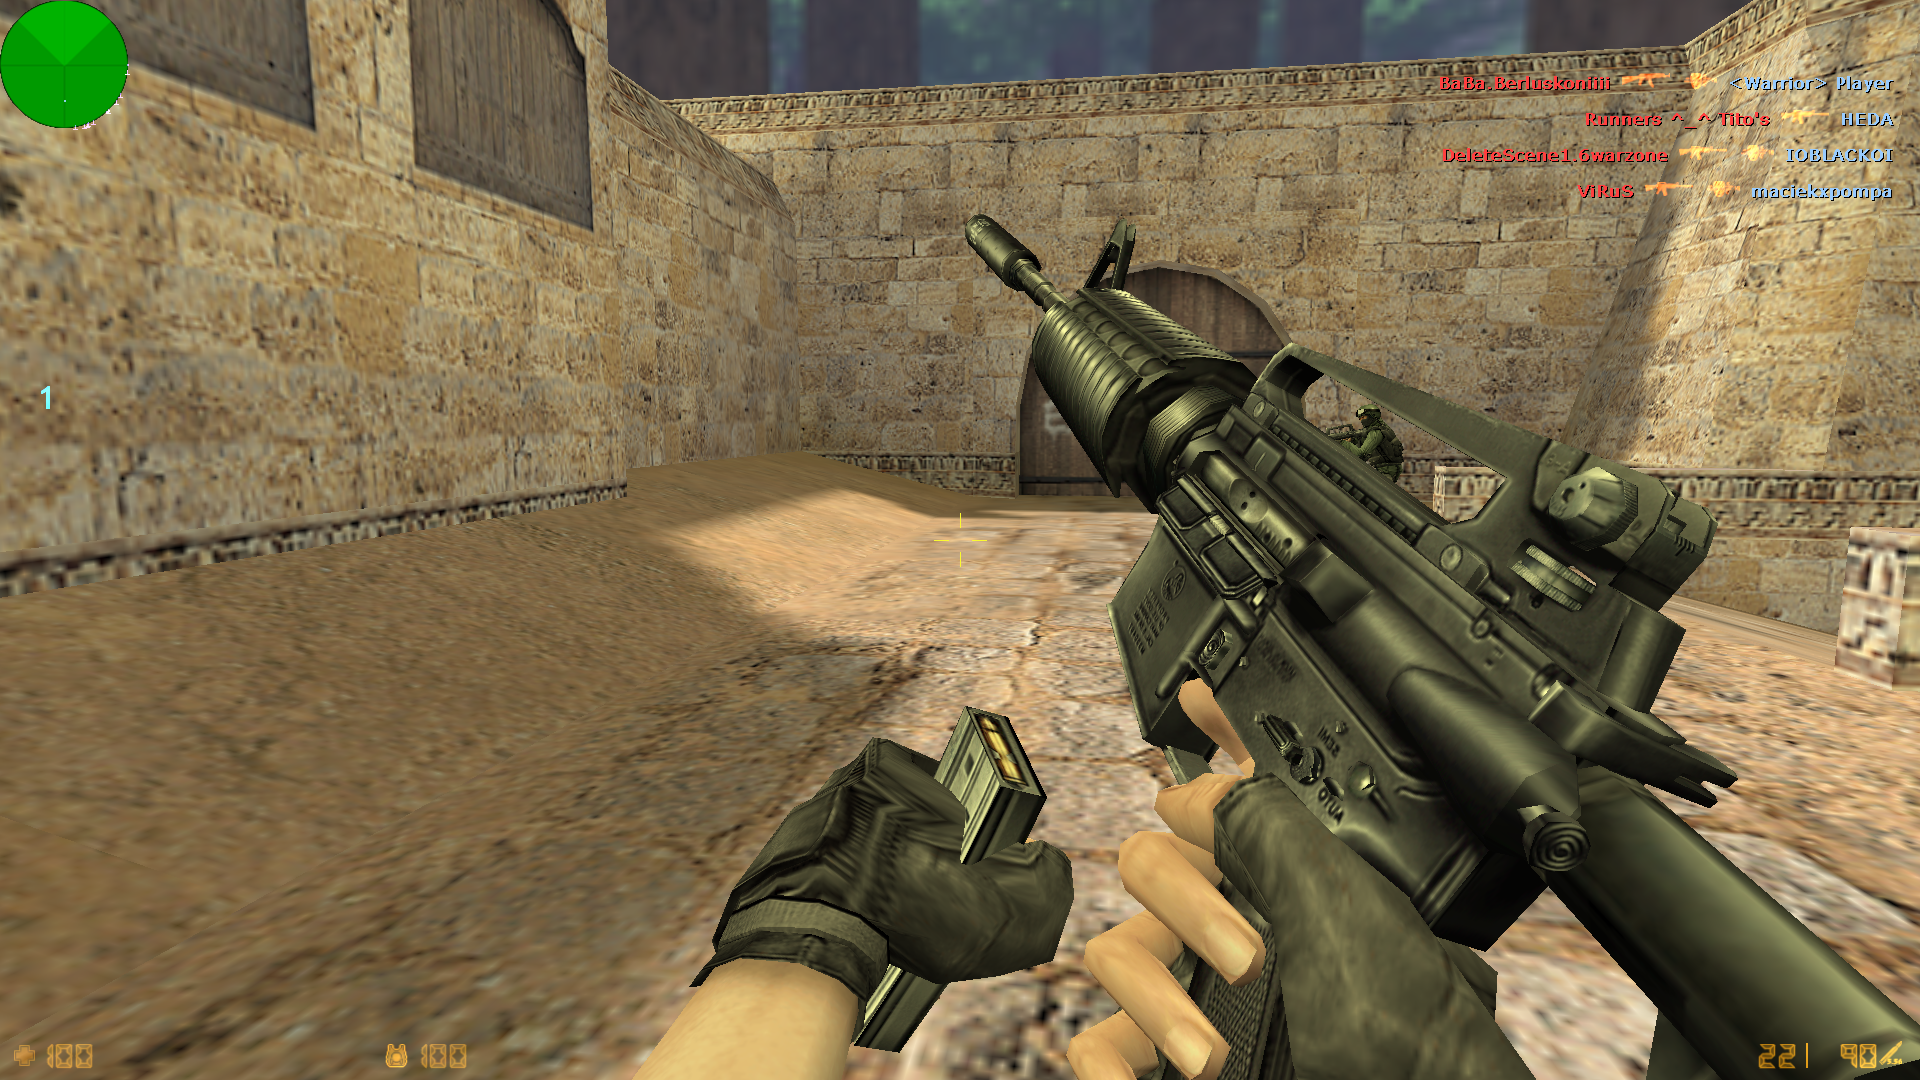 The Deleted Scenes Weapon Pack for CZ [Counter-Strike: Condition